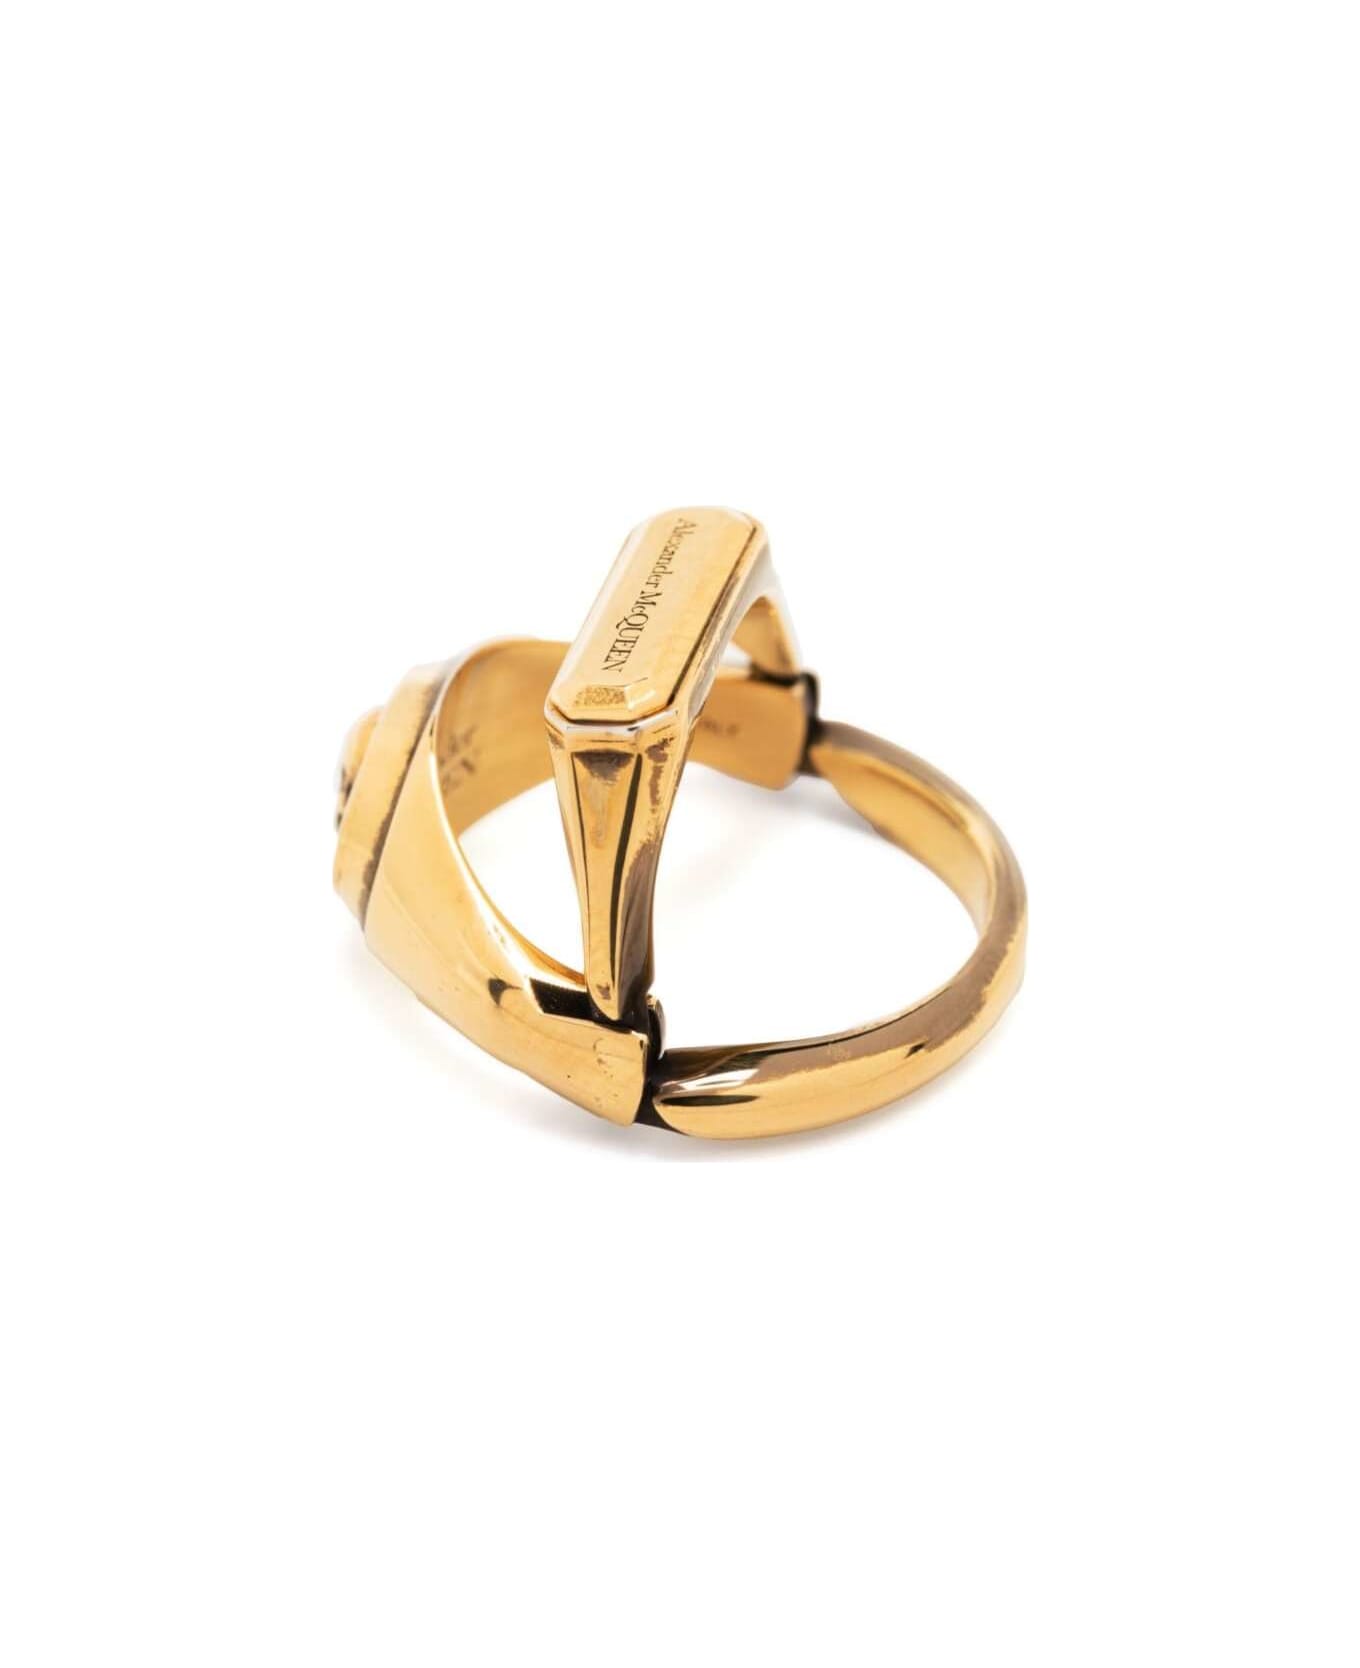 Alexander McQueen Gold-colored Double Ring With Skull Detail And Embossed Logo Lettering In Brass Woman - Metallic リング